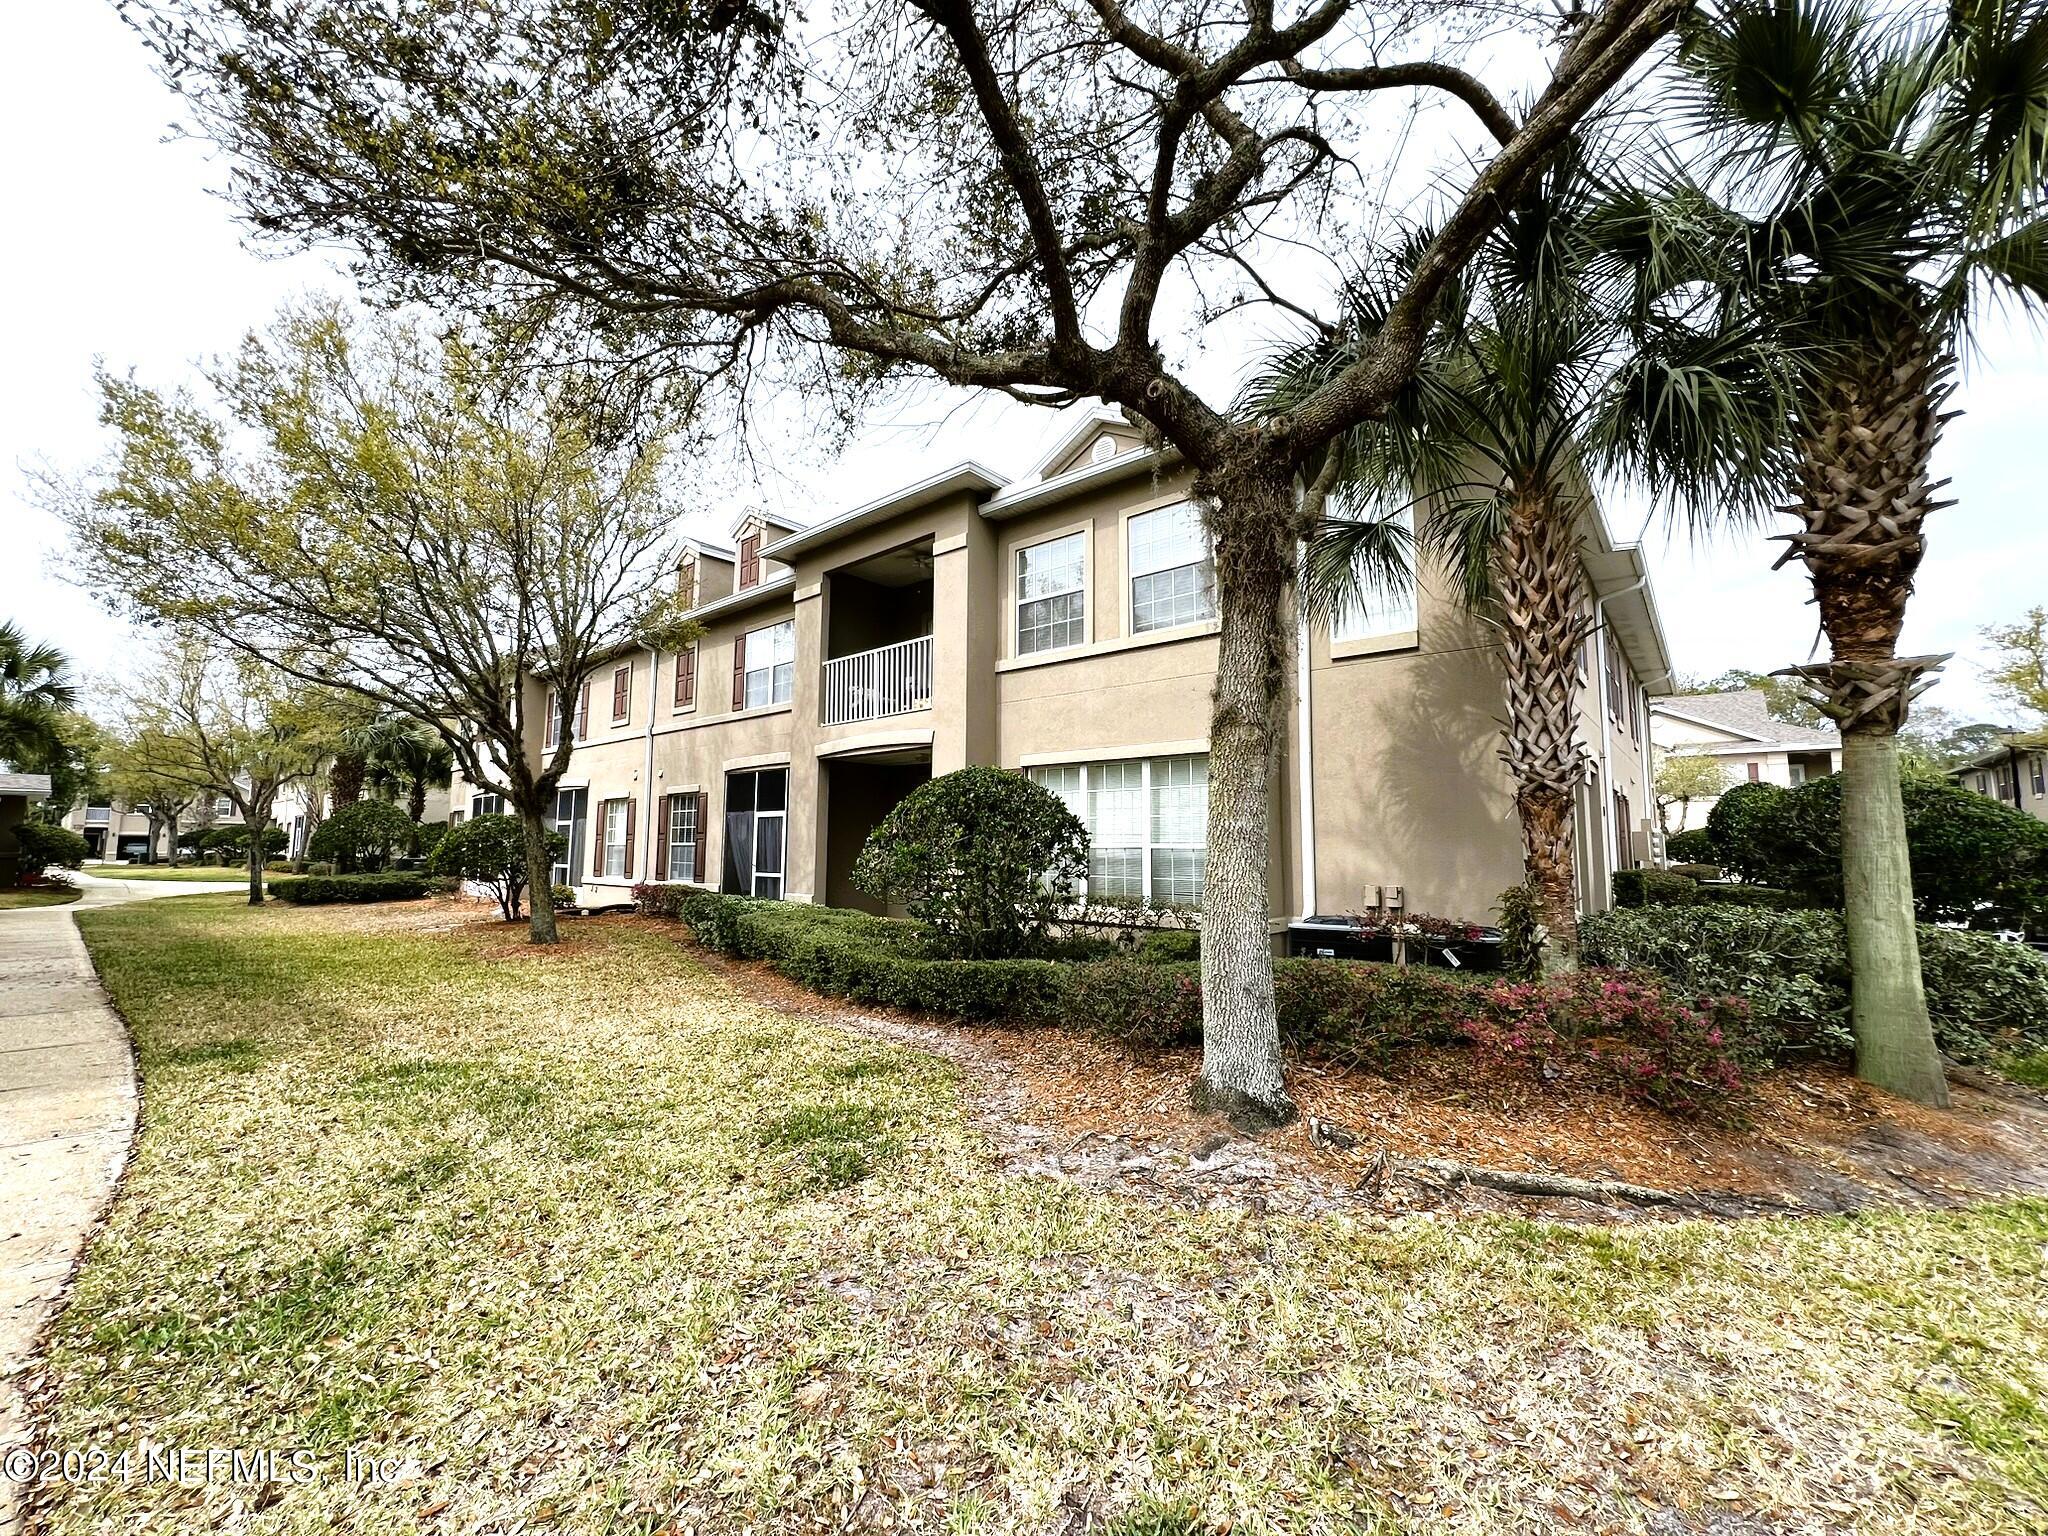 Jacksonville, FL home for sale located at 3882 SUMMER GROVE Way 55, Jacksonville, FL 32257